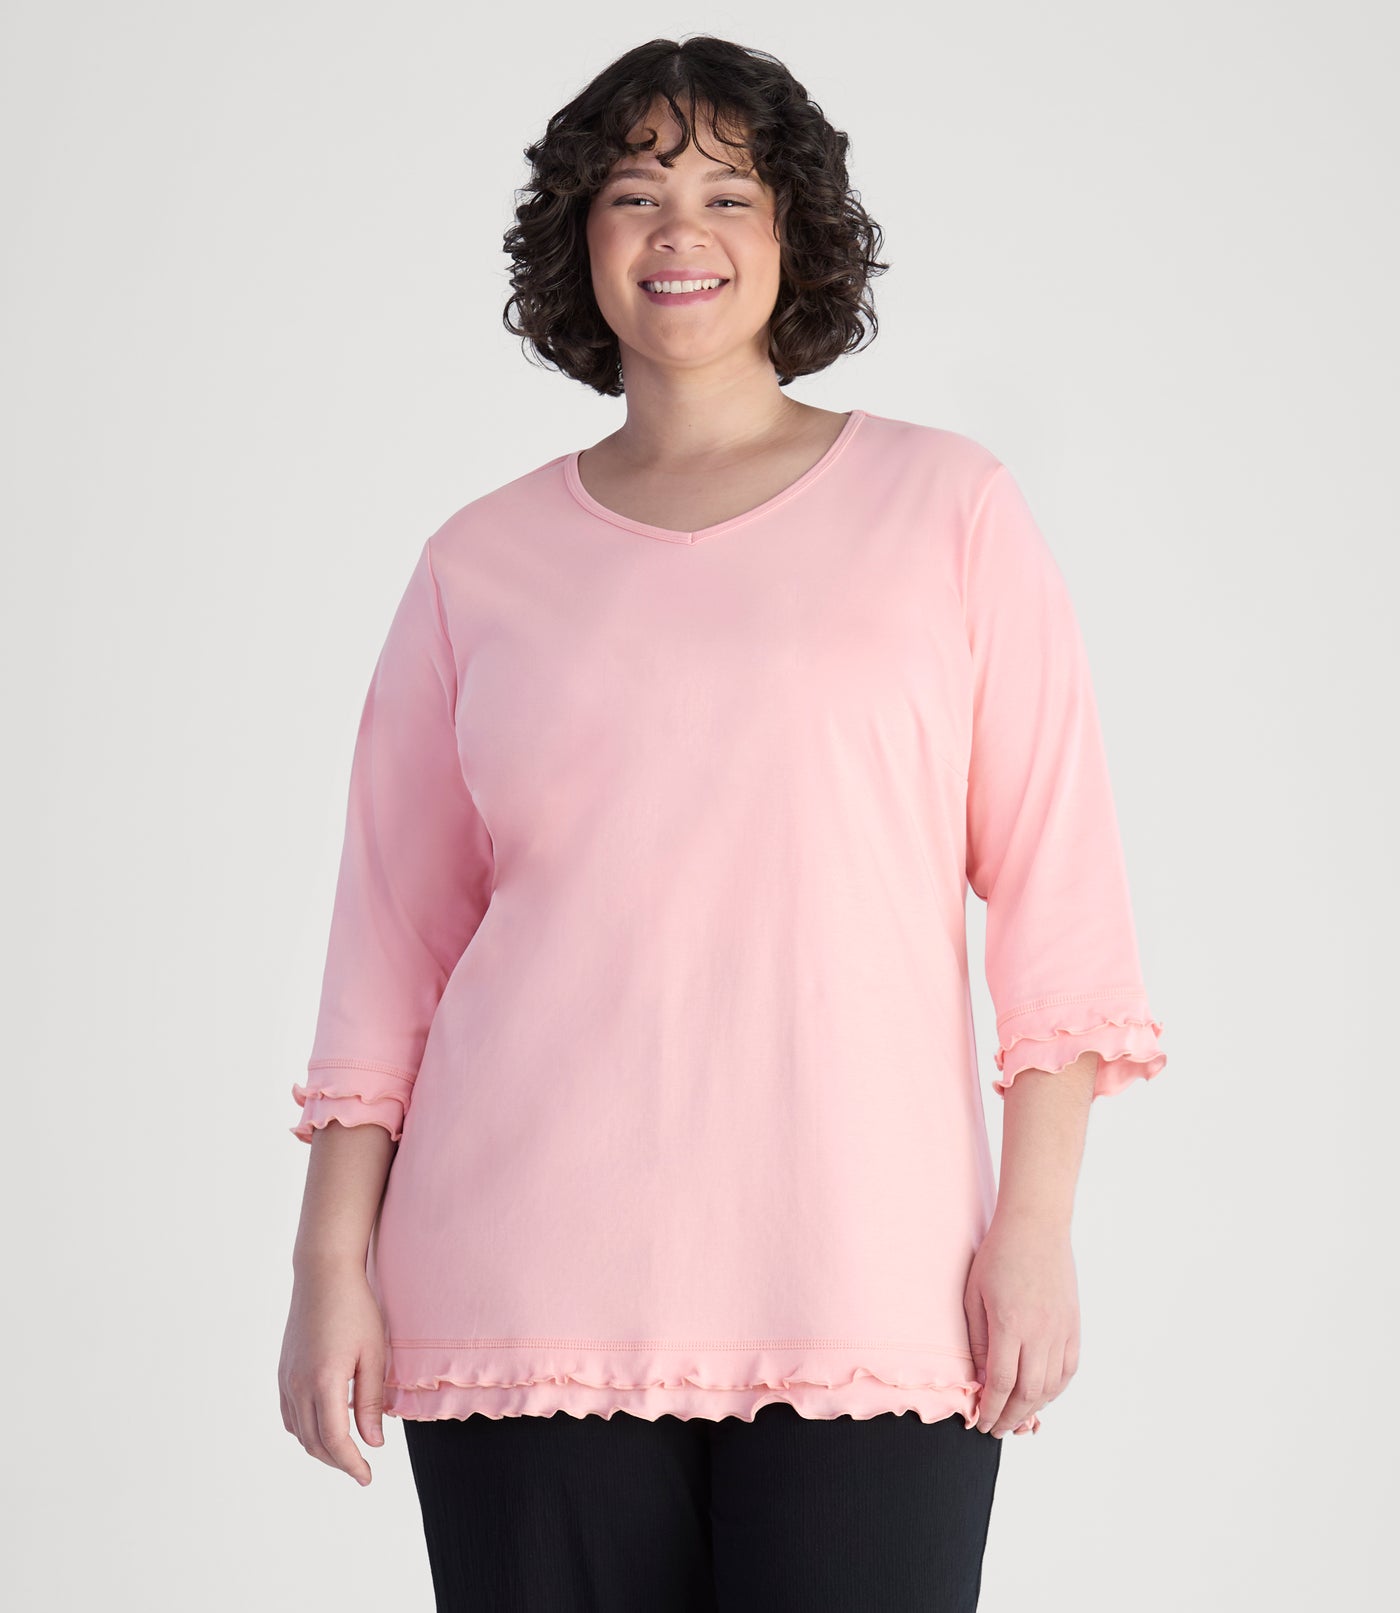 Model, facing front, wearing cotton chic lettuce trim 3-4 sleeve plus size top in color peach blossom.